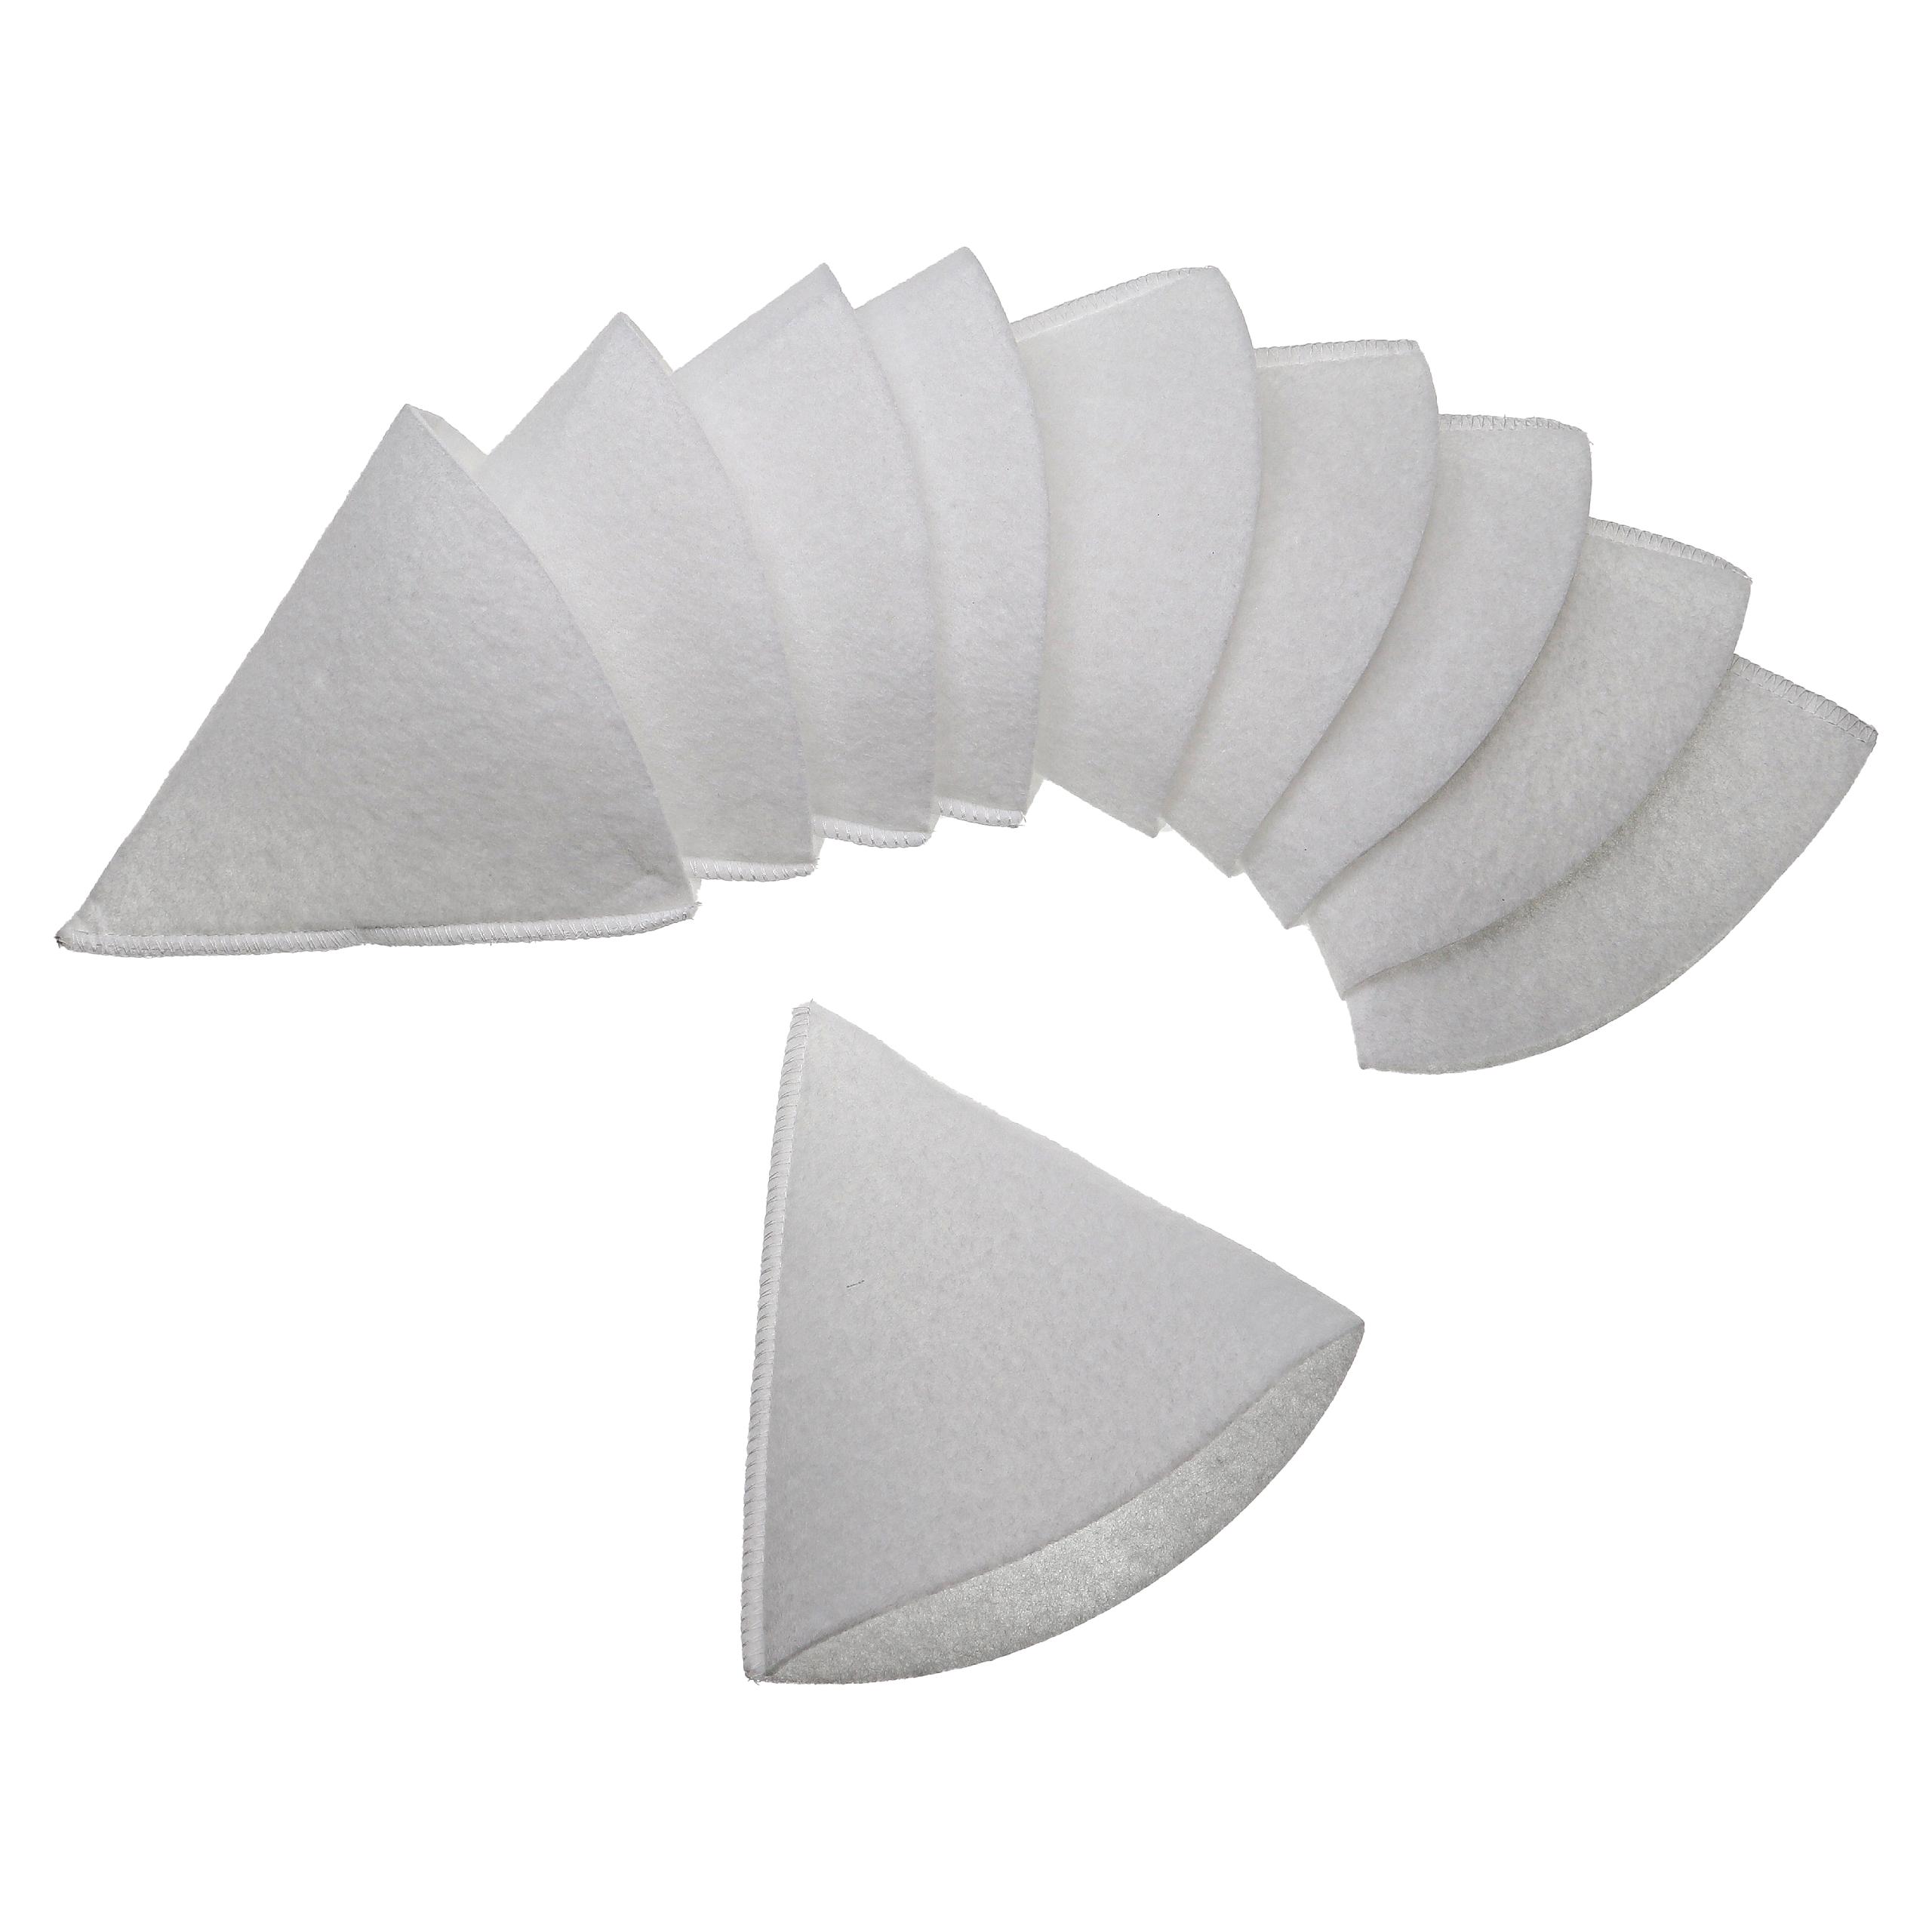 10x Conical Filter replaces Zehnder 990320031 for Zehnder Ventilation System - Exhaust Air Filter G4, DN 100